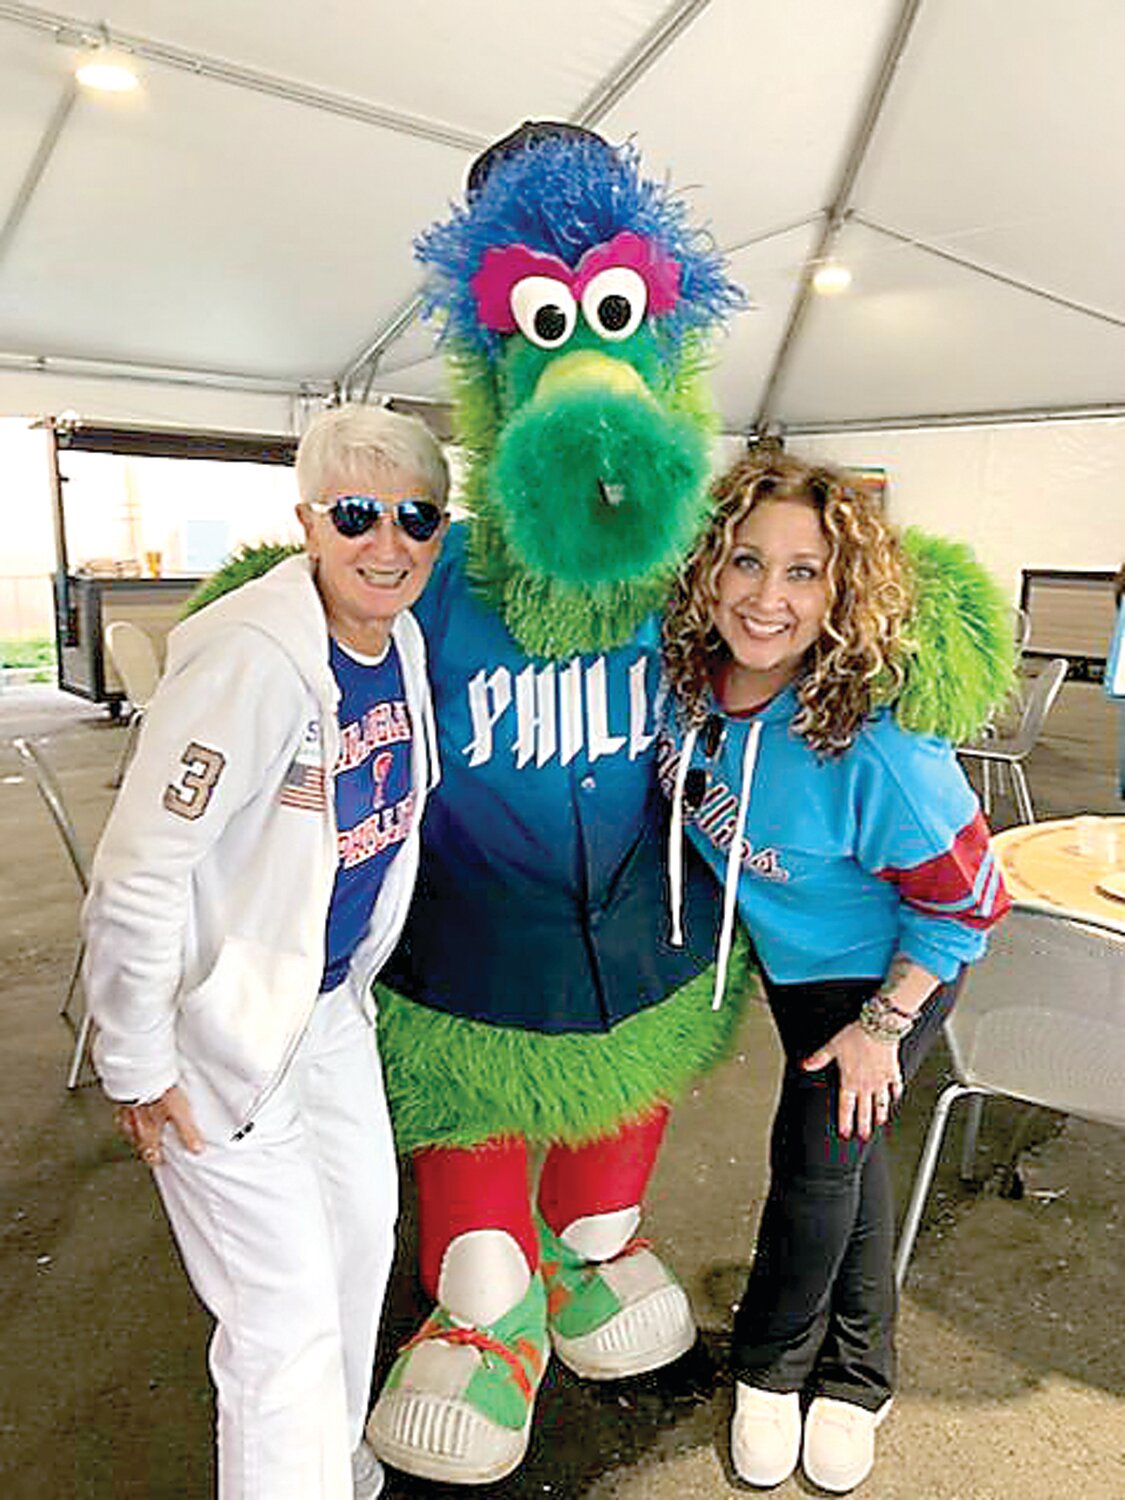 Geri Delevich and Nadine Sobusiak with the Phillie Phanatic.